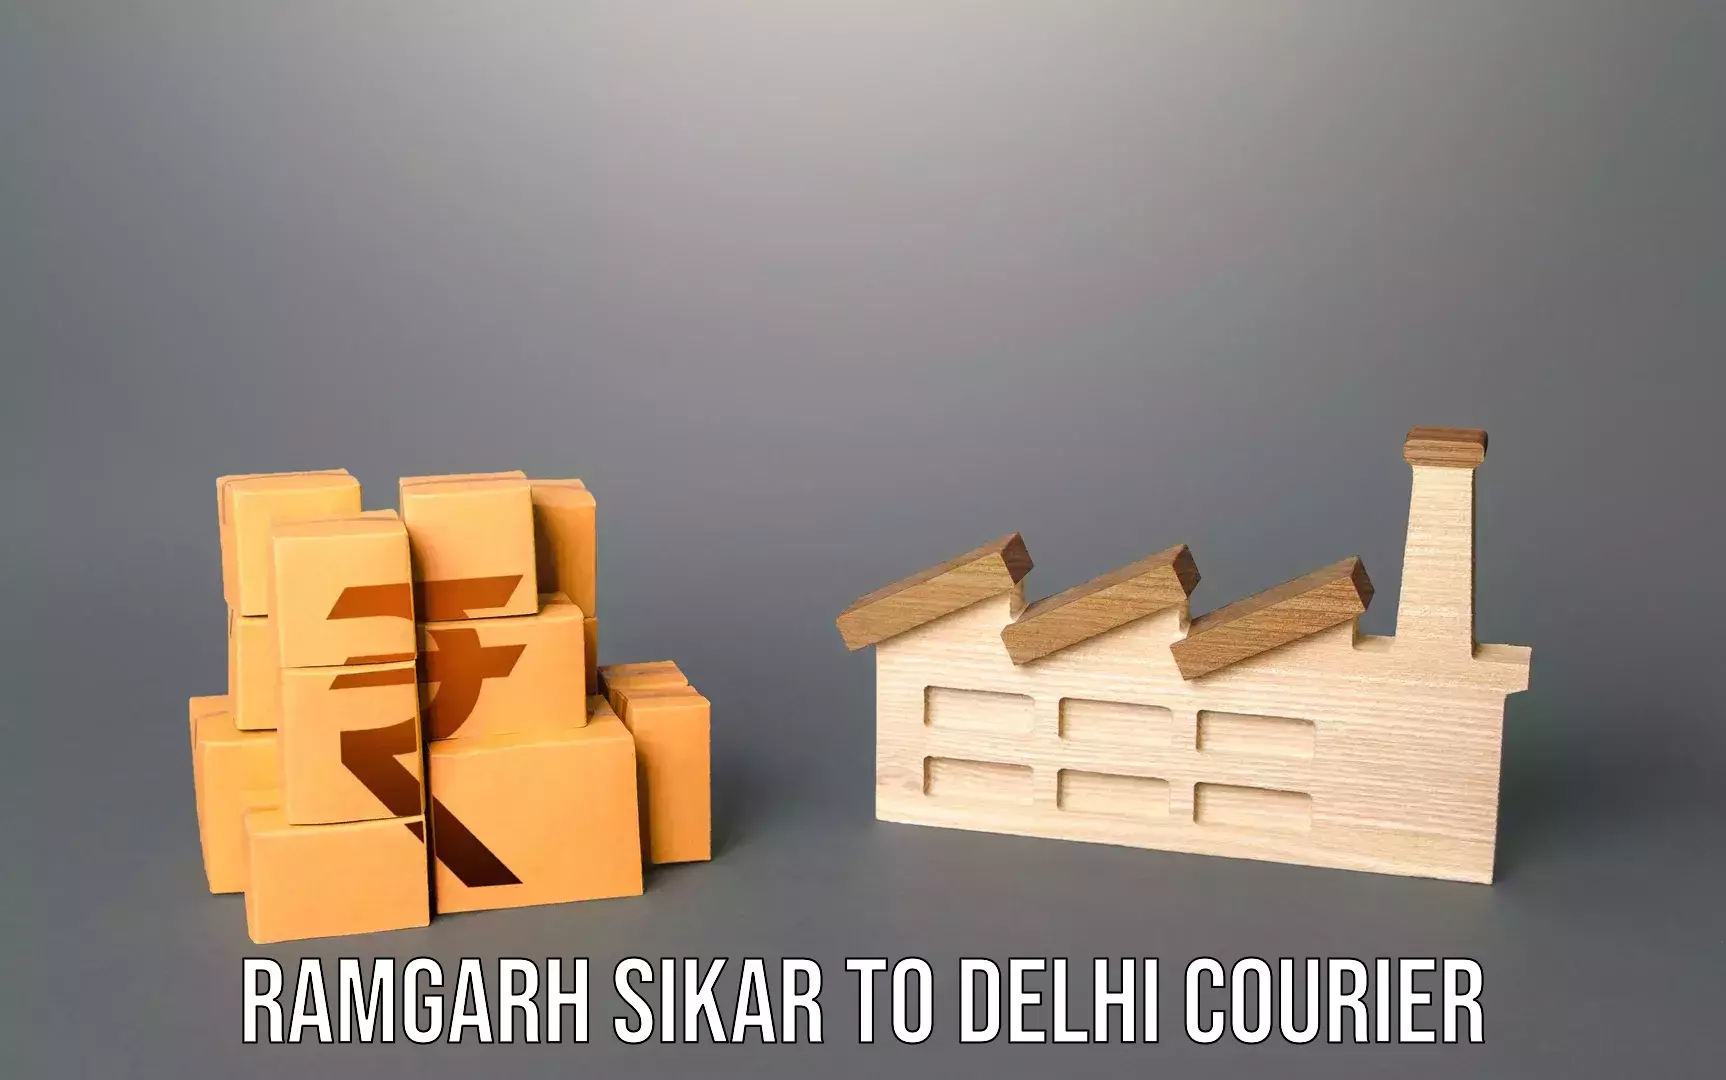 Automated luggage transport Ramgarh Sikar to East Delhi